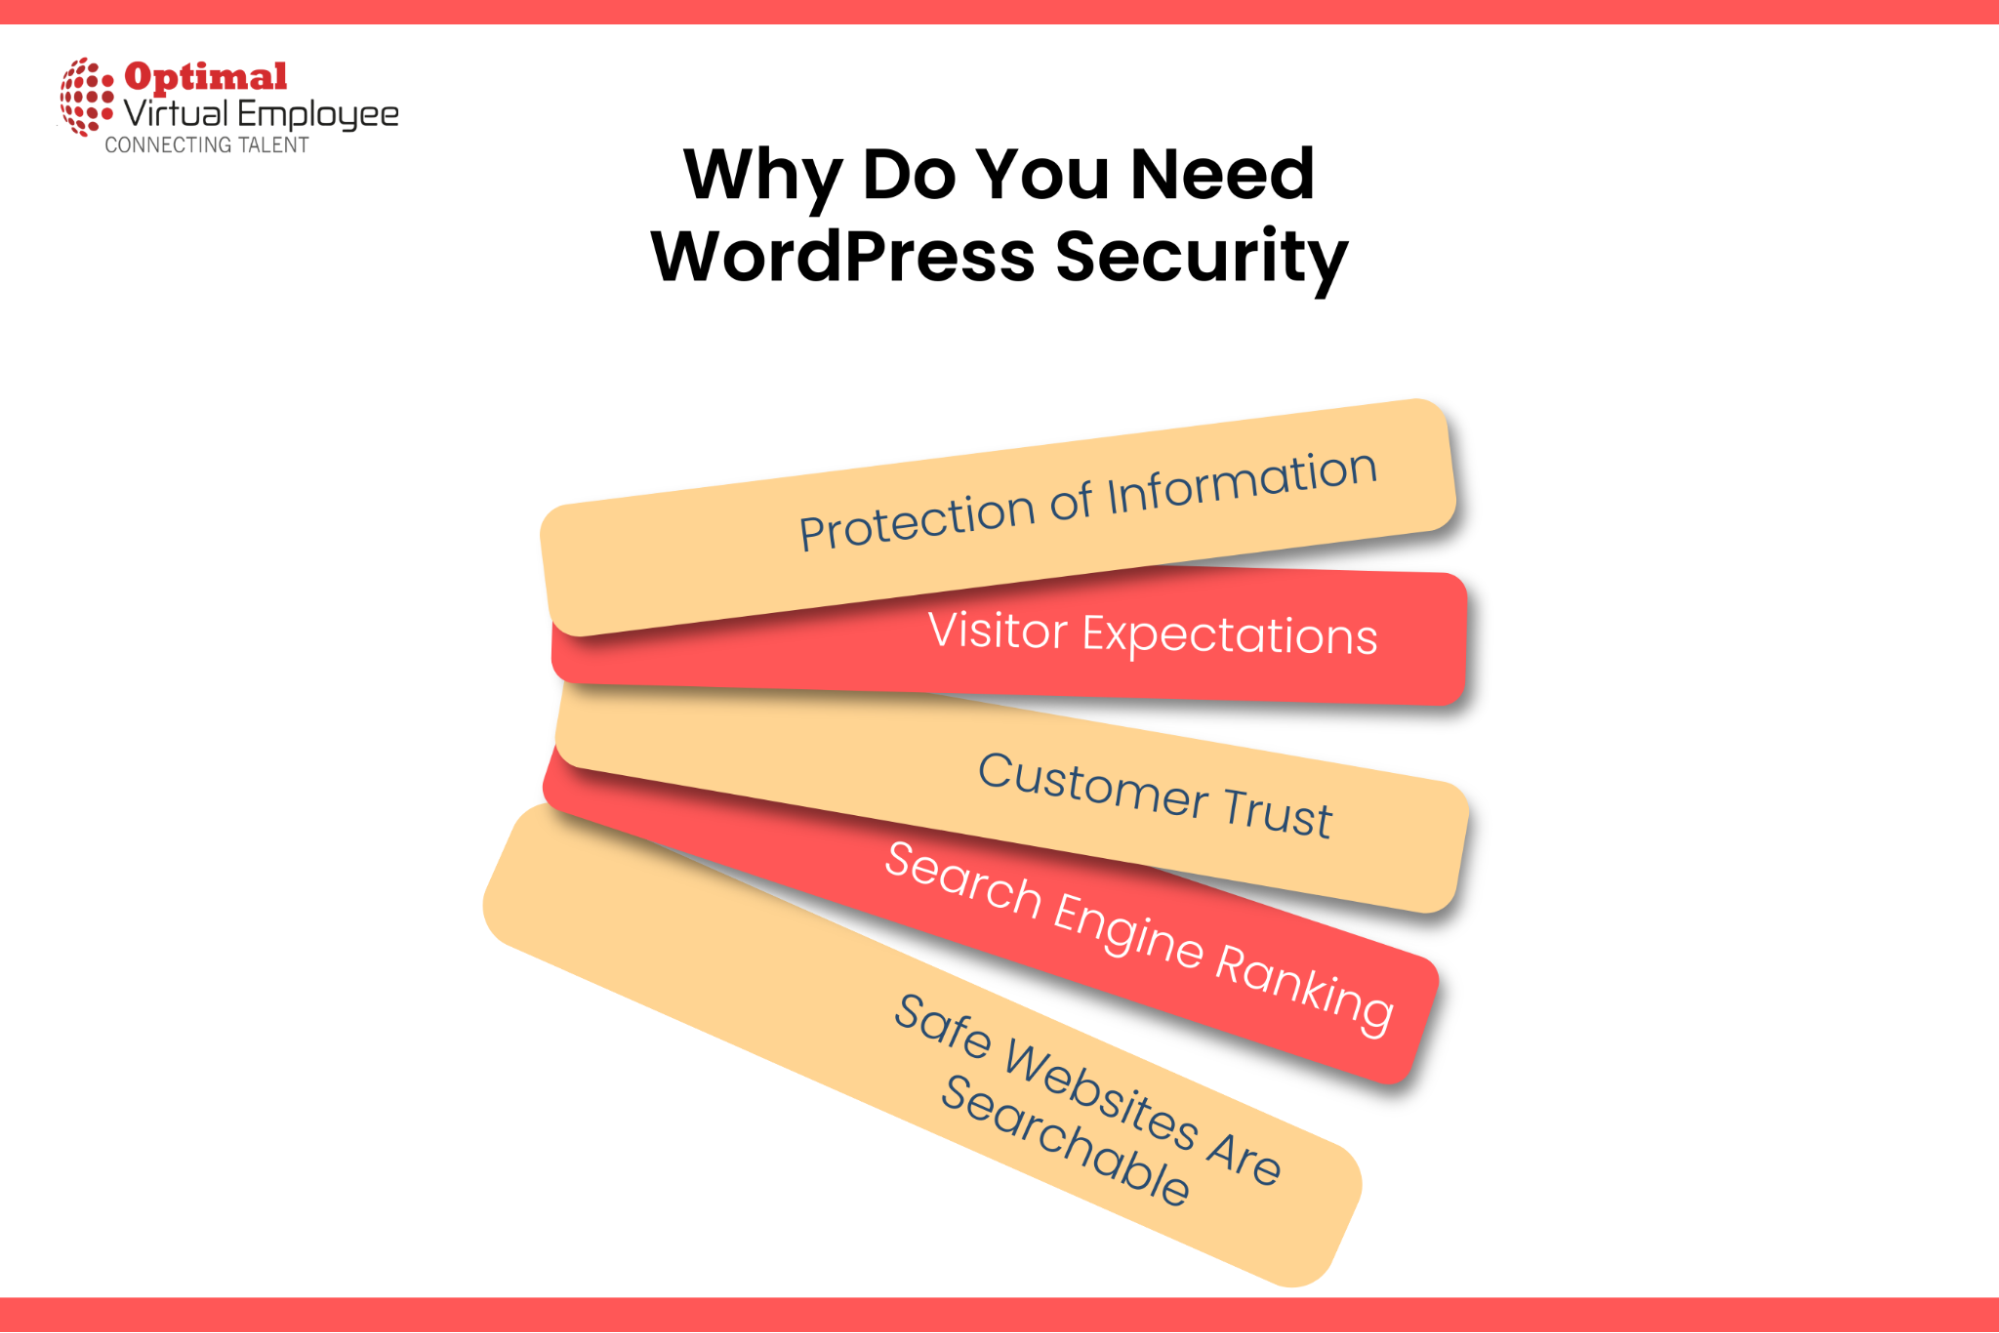 Why Do You Need WordPress Security